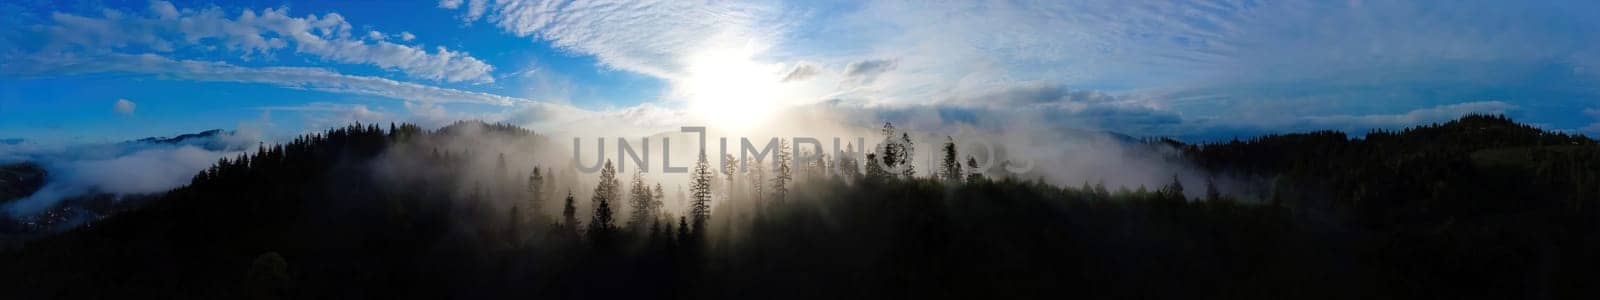 Panoramic Mountain landscape in fog, landscape with misty mountain forest, sun under peak. download image